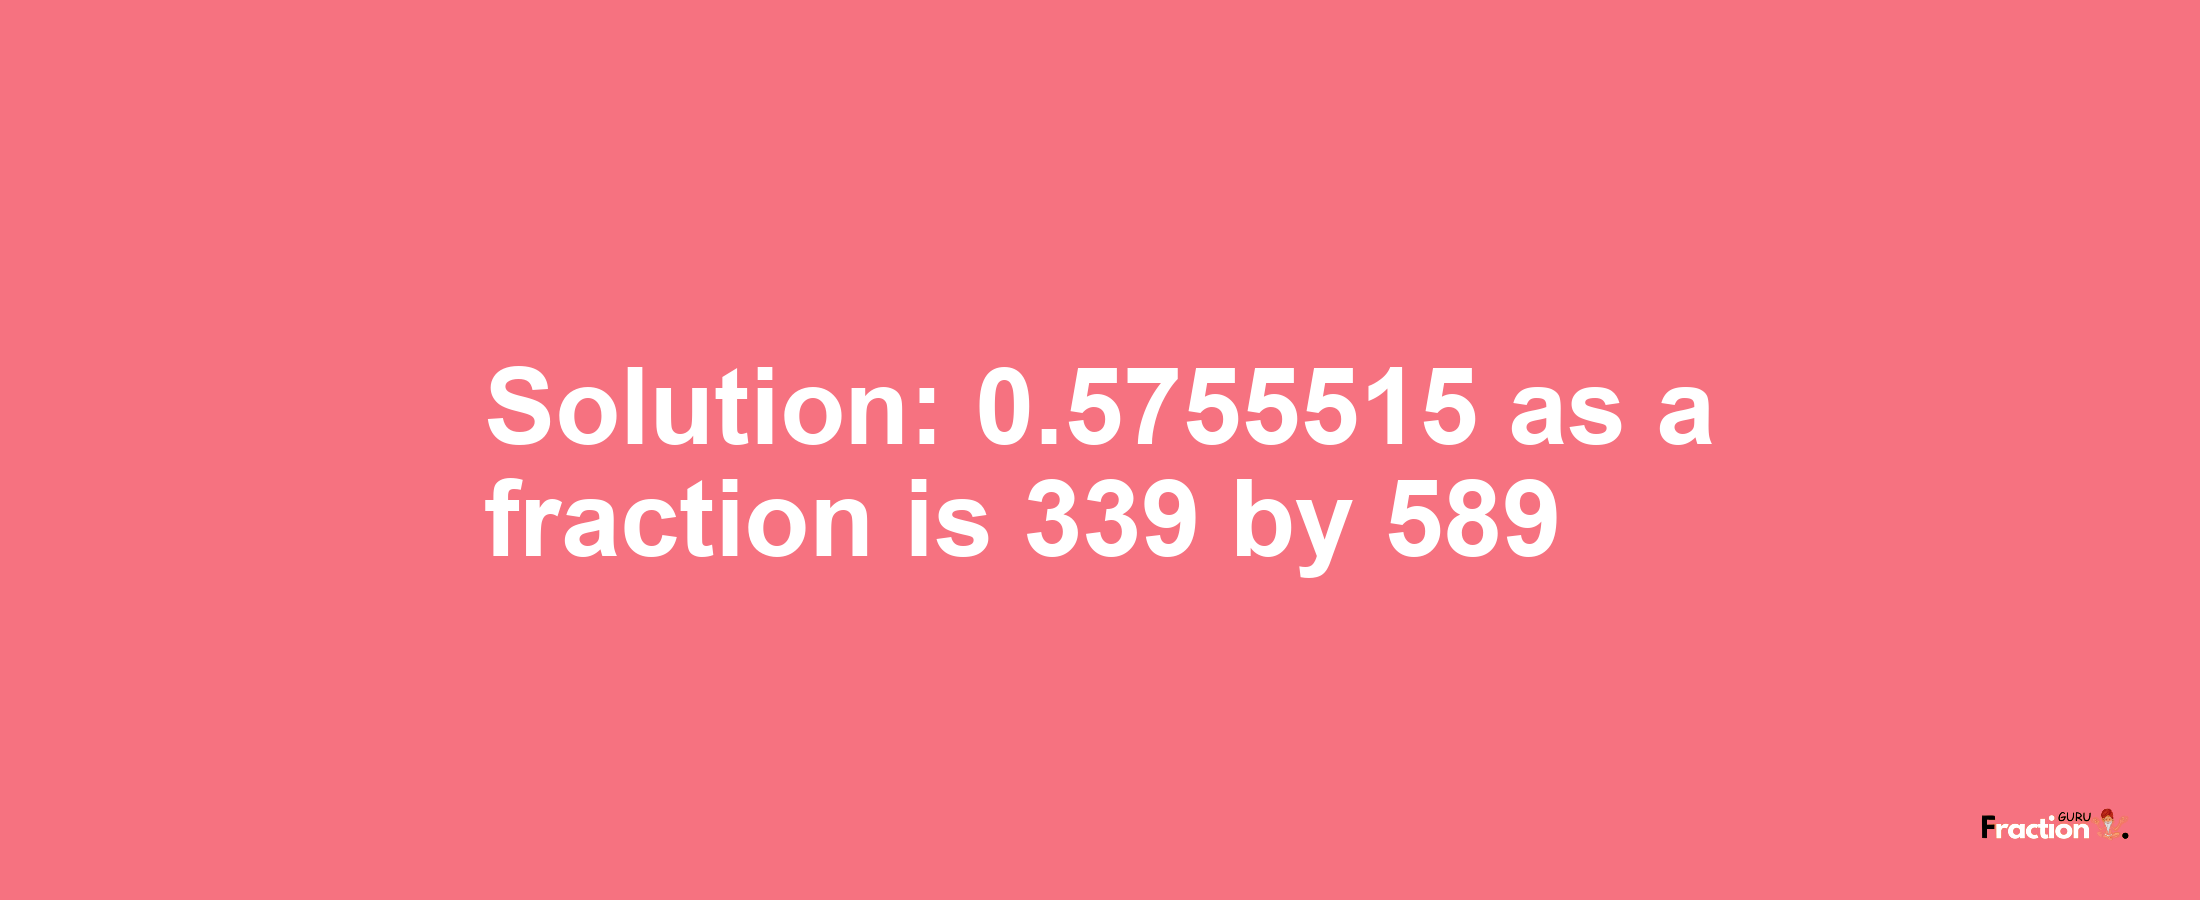 Solution:0.5755515 as a fraction is 339/589